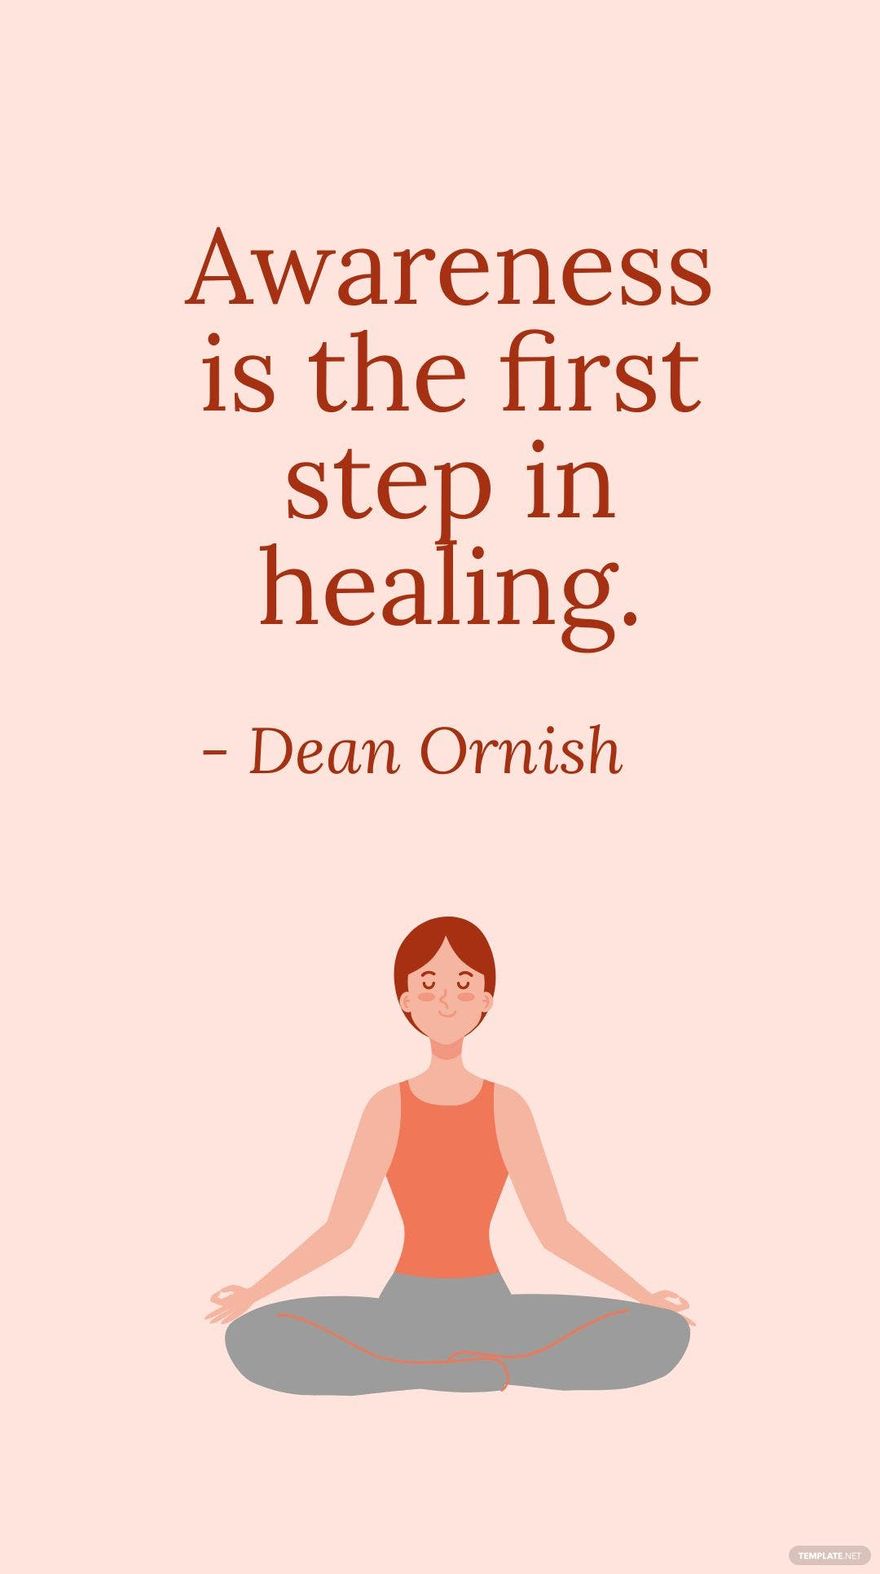 Free Dean Ornish - Awareness is the first step in healing.